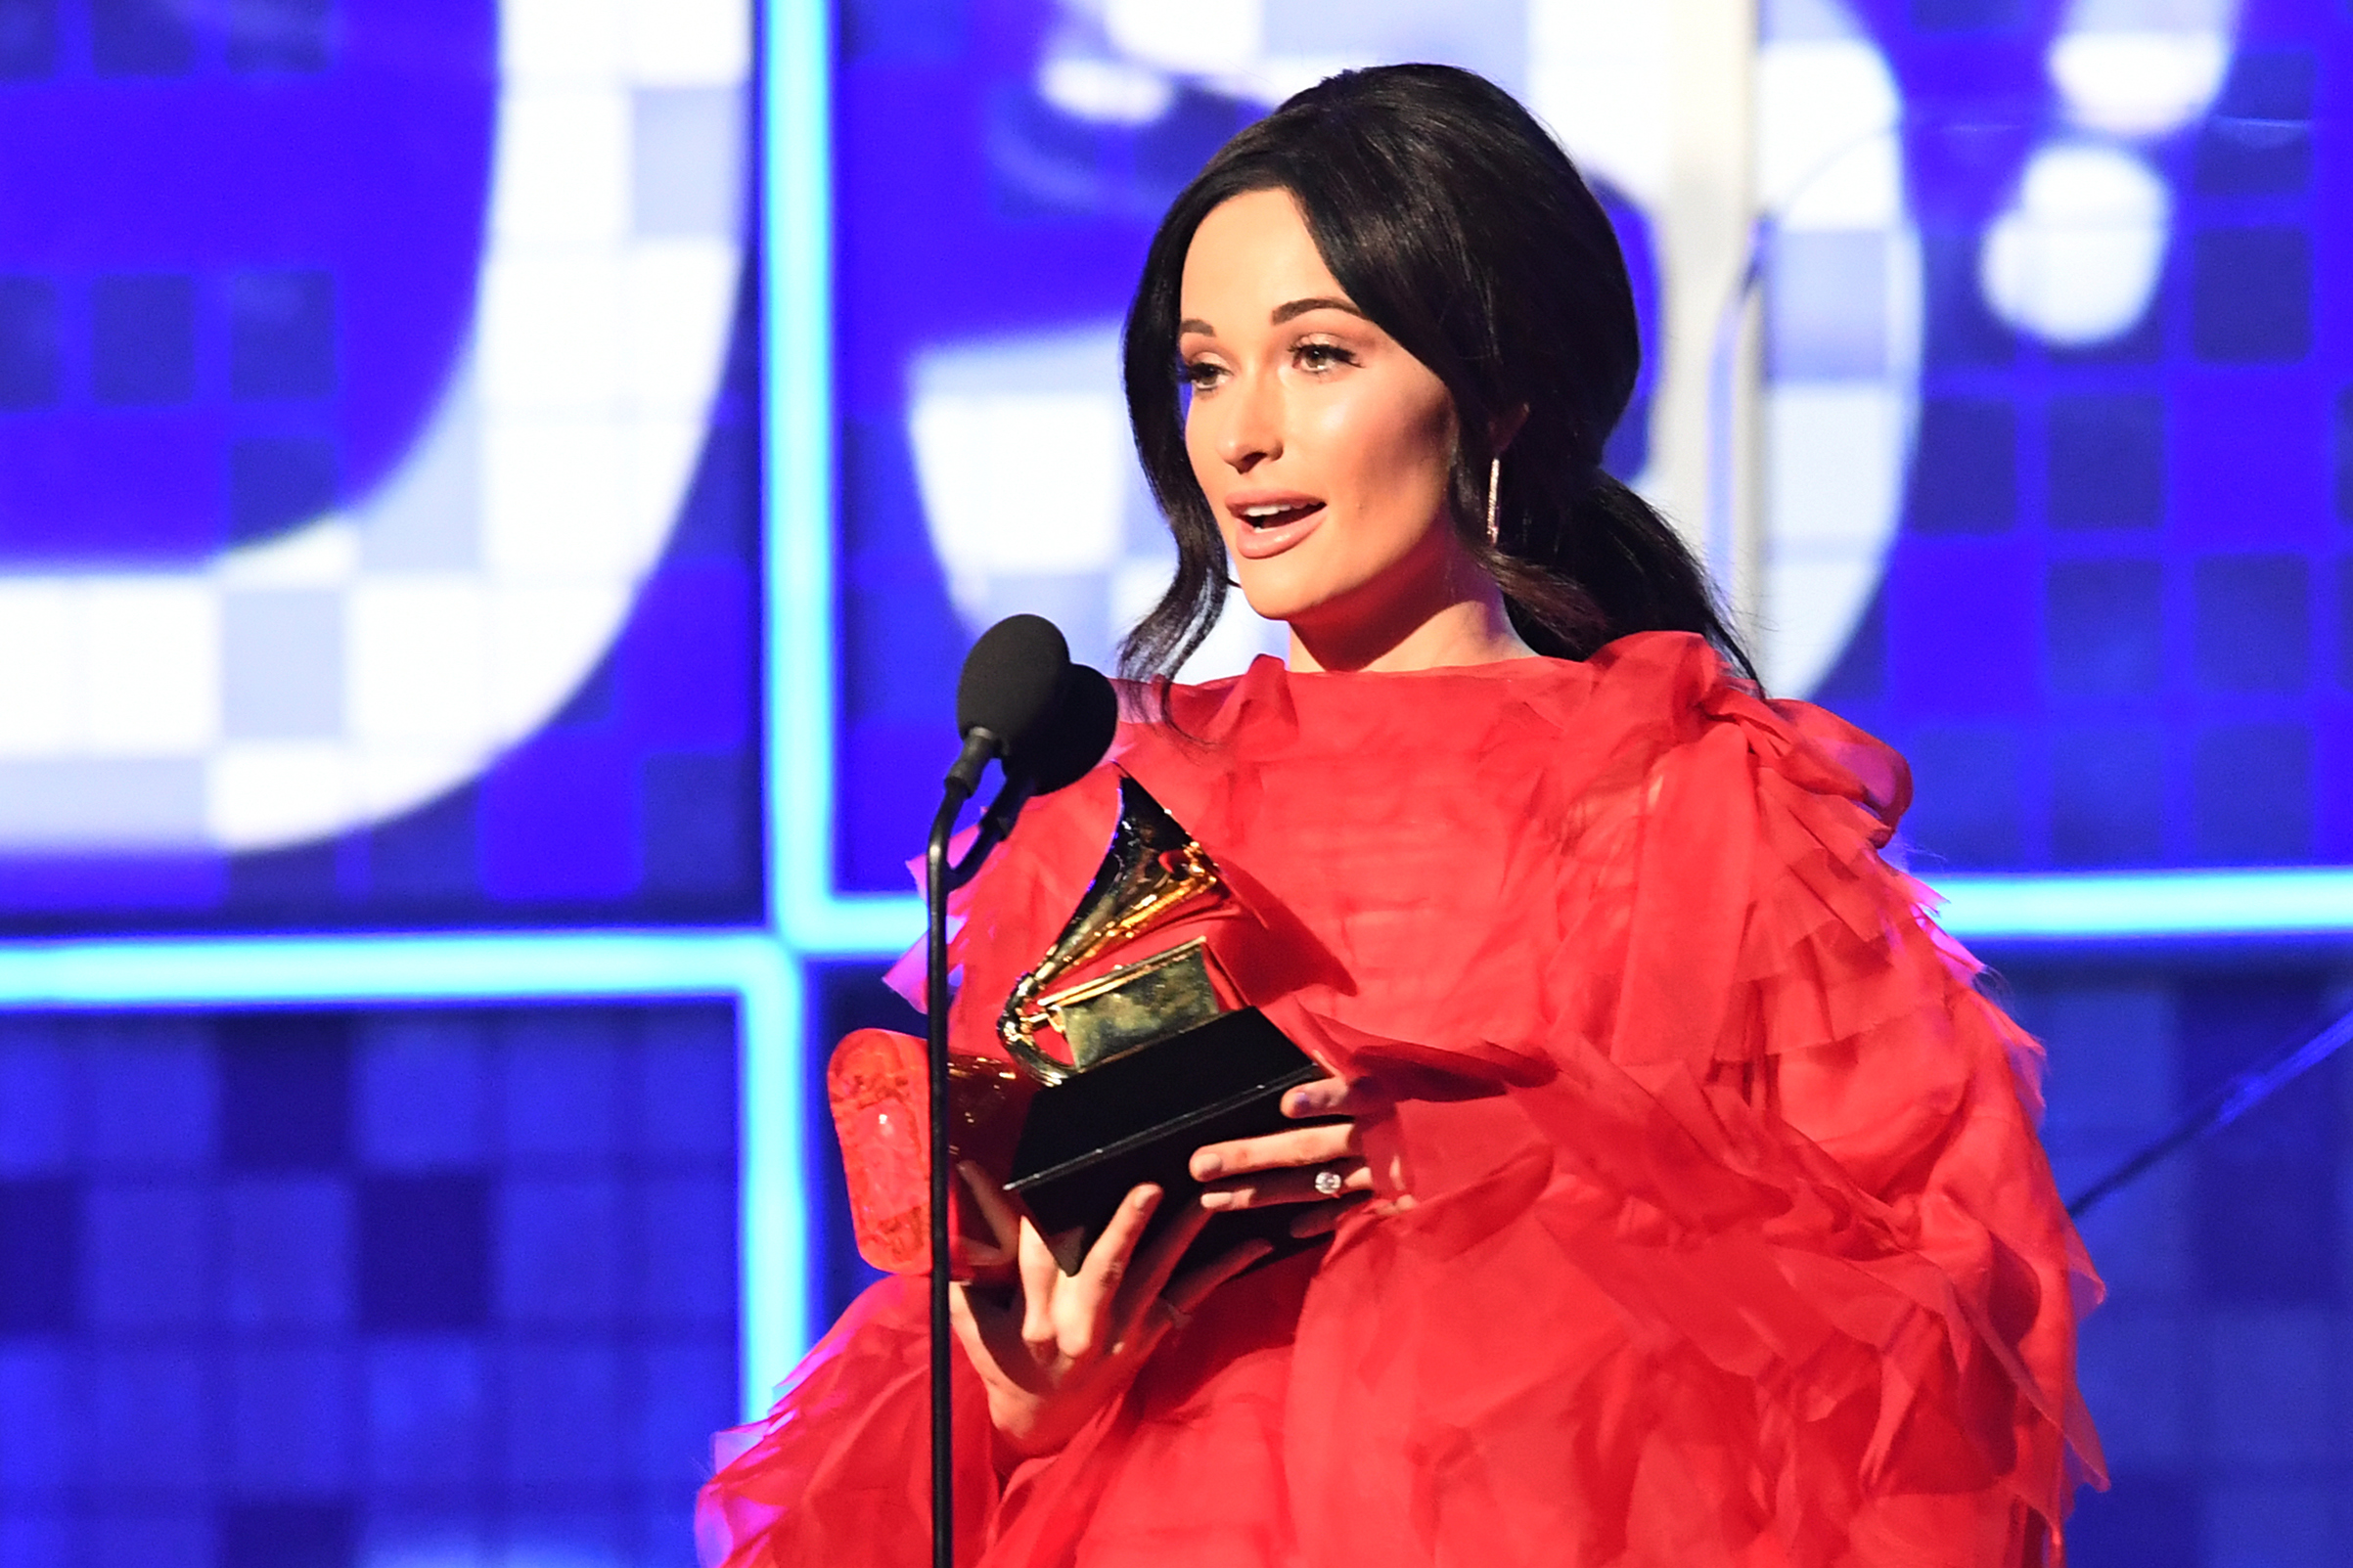 Kacey Musgraves accepts the award for Album Of The Year for "Golden Hour" onstage during the 61st Annual Grammy Awards on Feb. 10, 2019, in Los Angeles. (Robyn Beck—AFP/Getty Images)